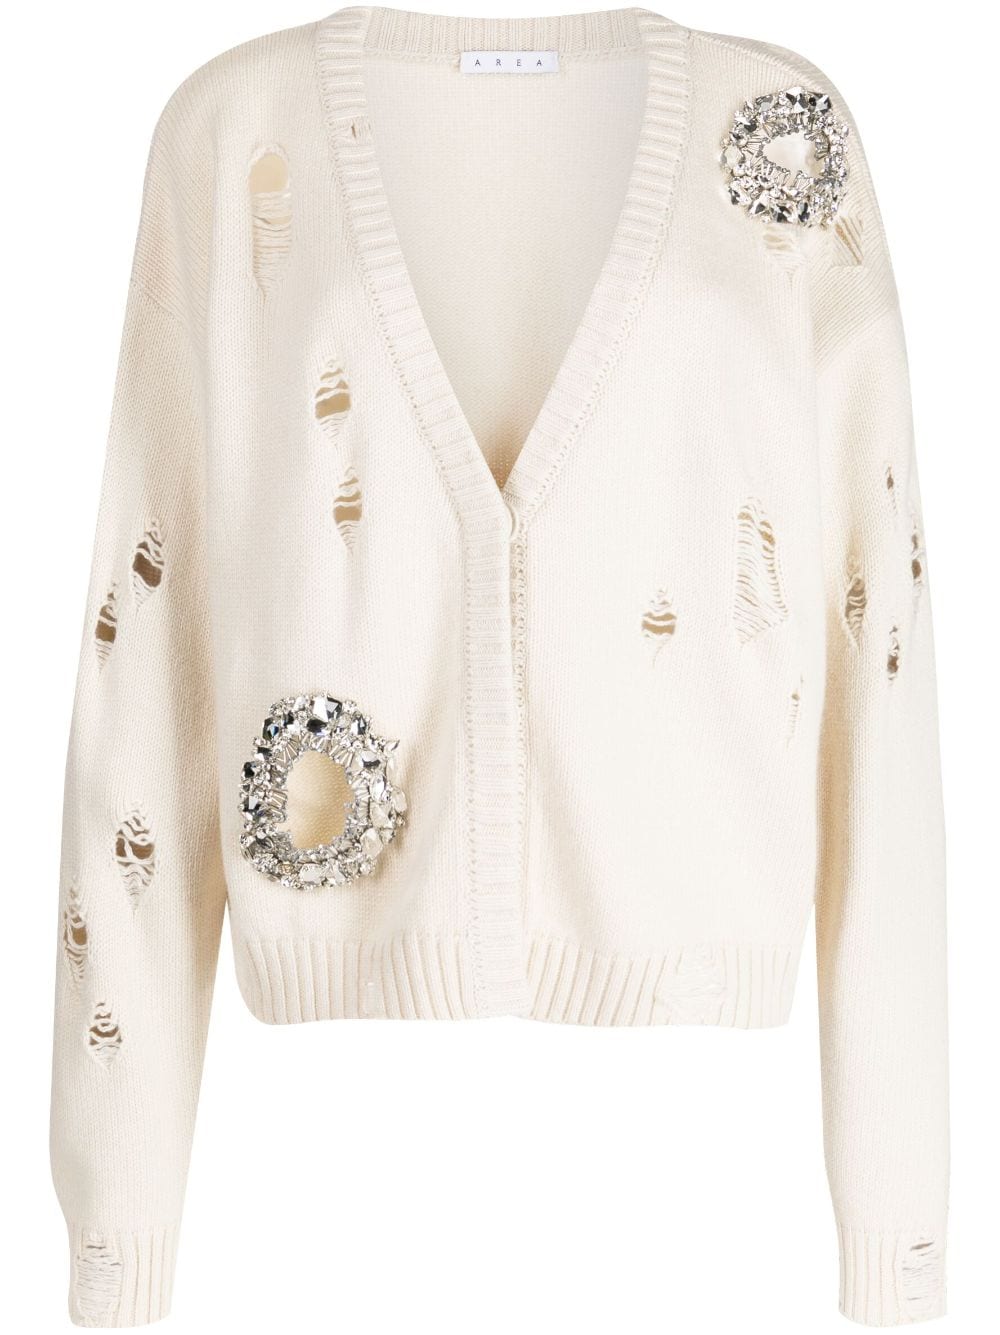 AREA distressed-effect crystal-embellished cardigan - Neutrals